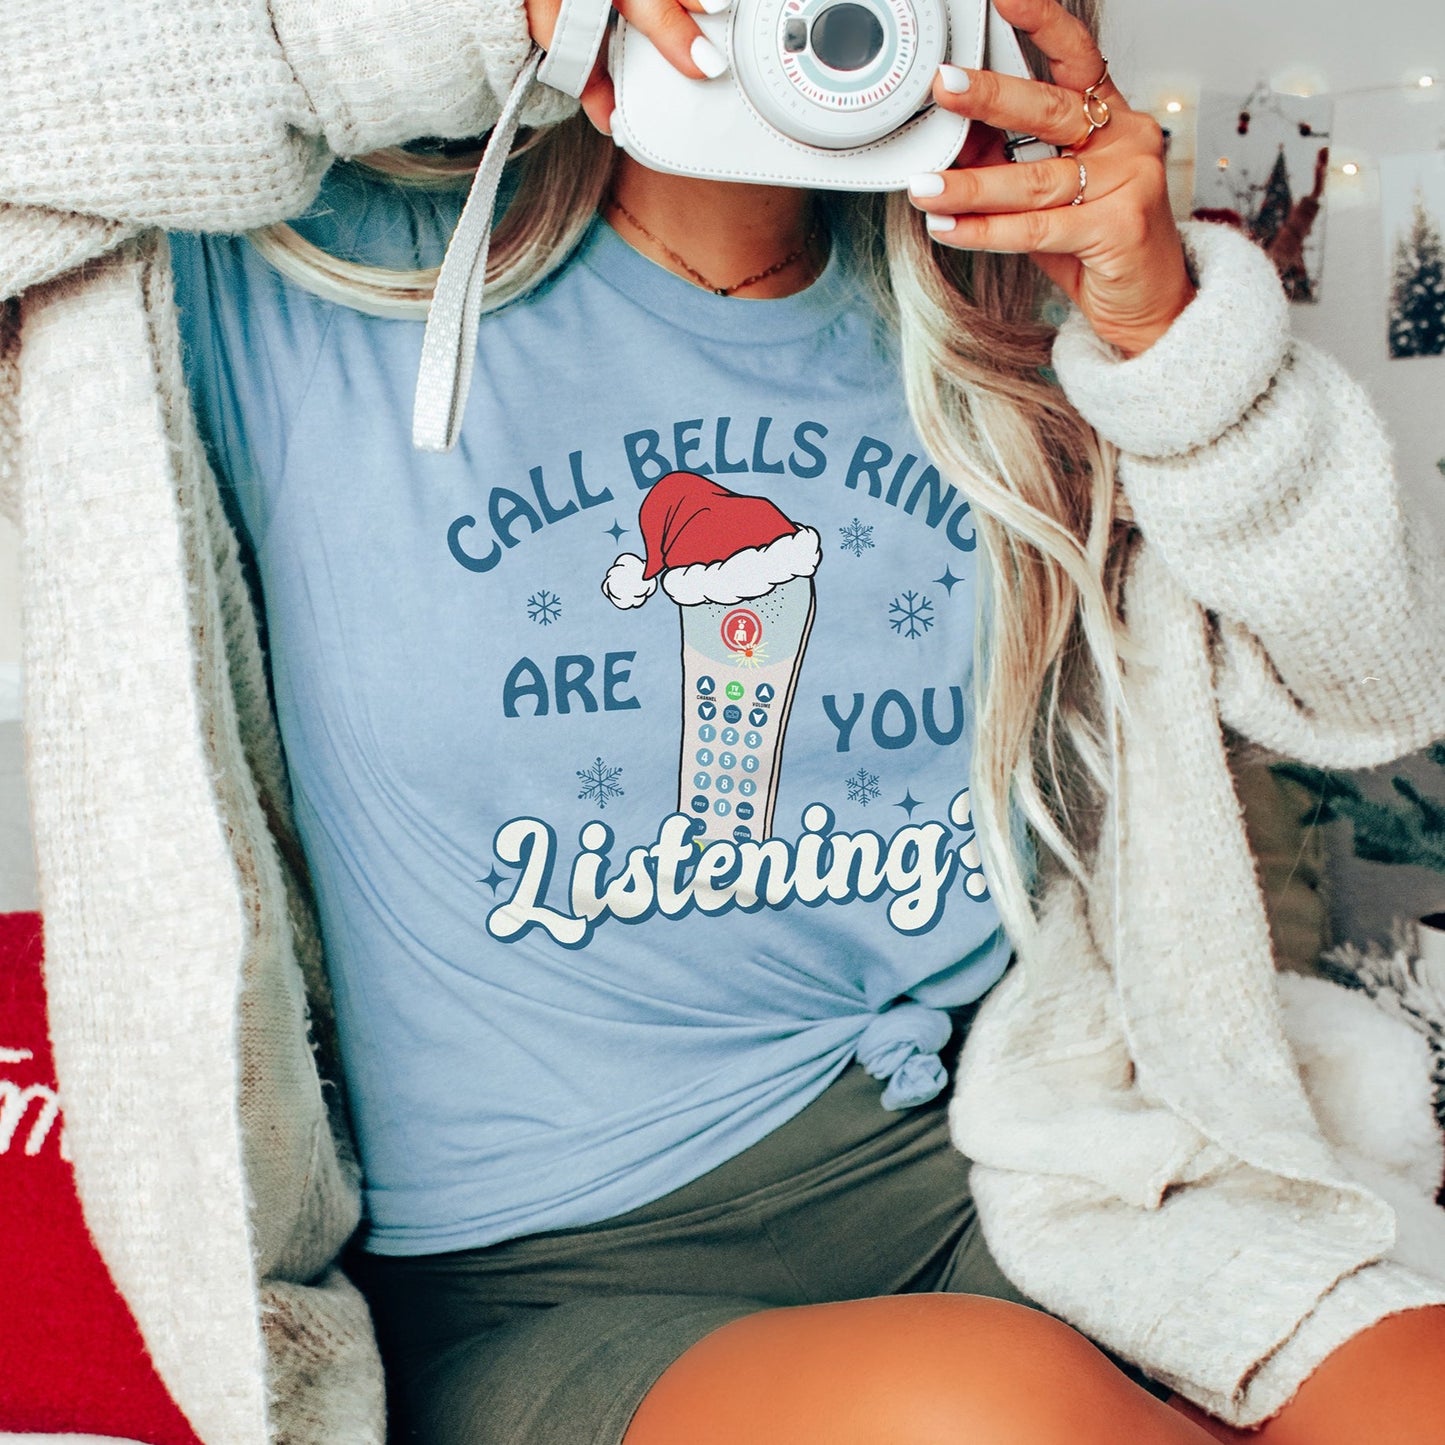 Call Bells Ring Are You Listening T-Shirt